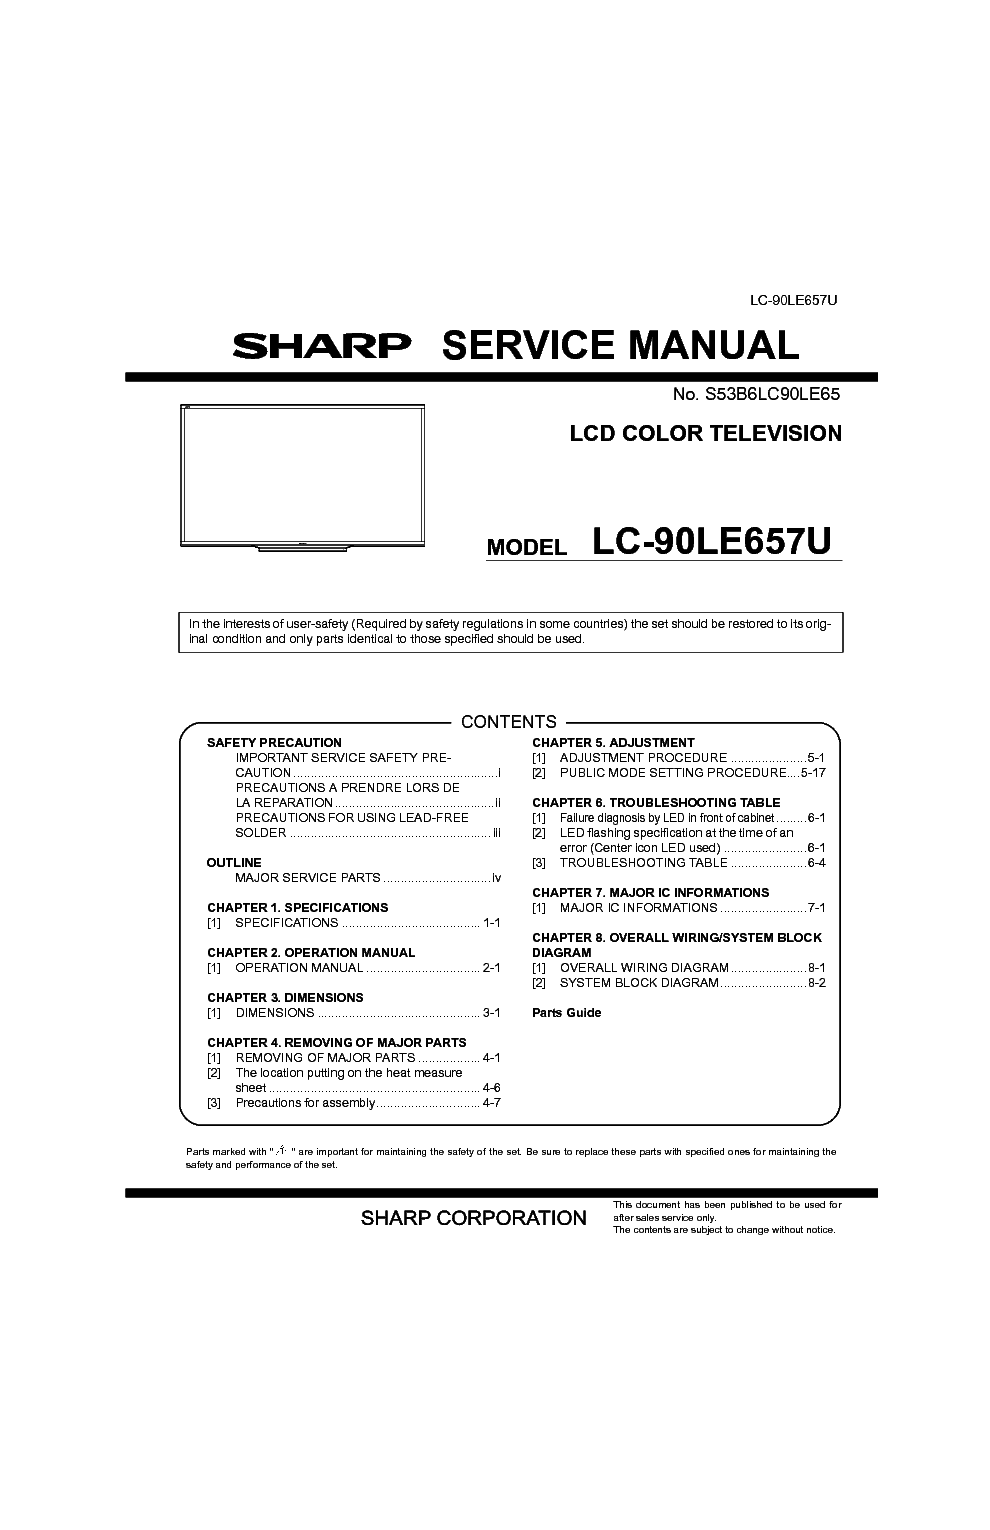 SHARP LC-90LE657U LCD TV service manual (1st page)